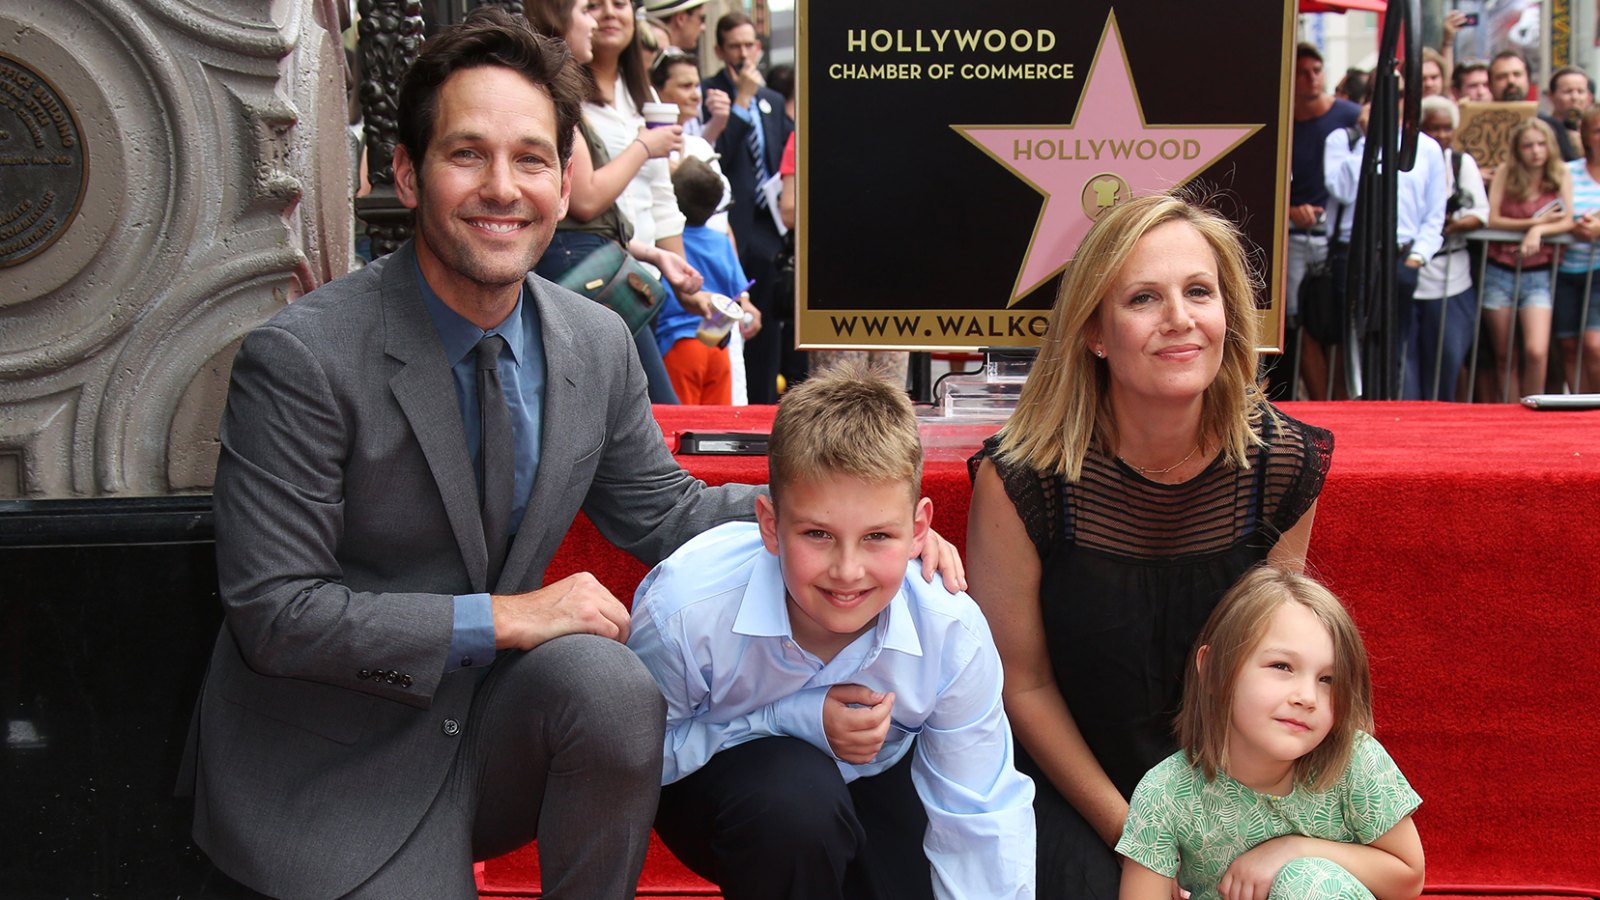 Paul Rudd’s Kids Are ‘Excited’ He’s in Marvel Movies